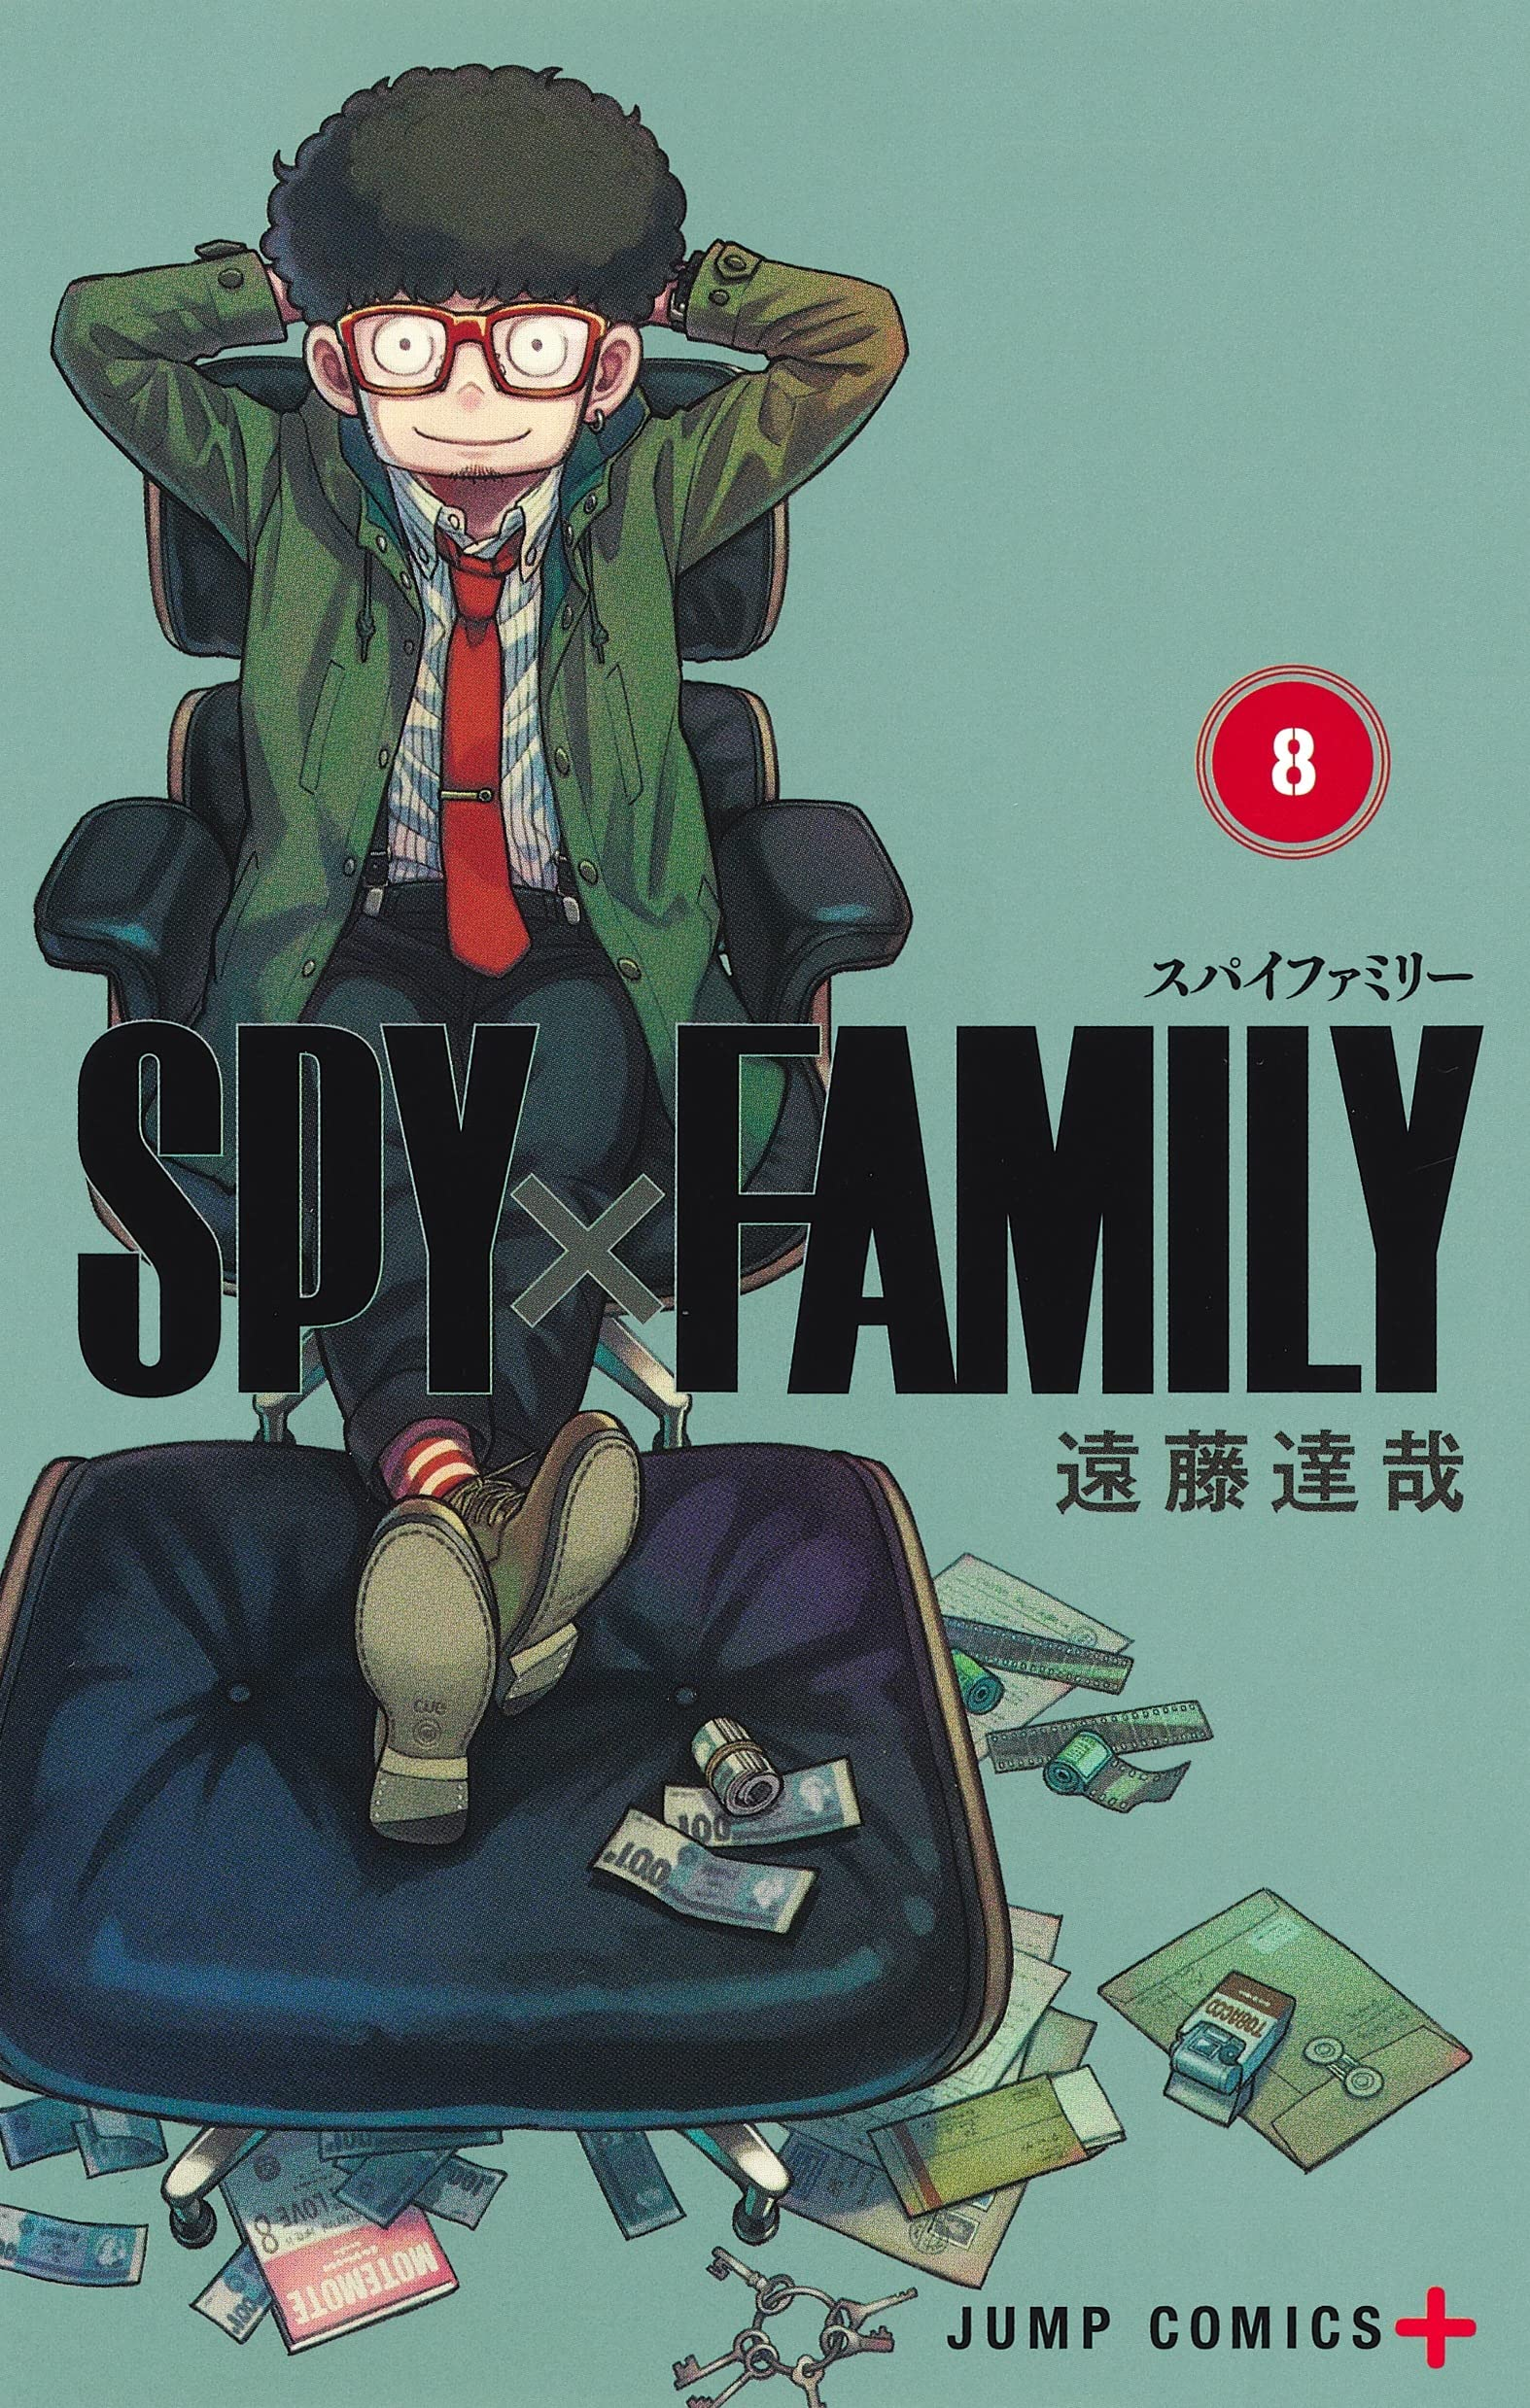 Where to read Spy x Family manga - Try Hard Guides